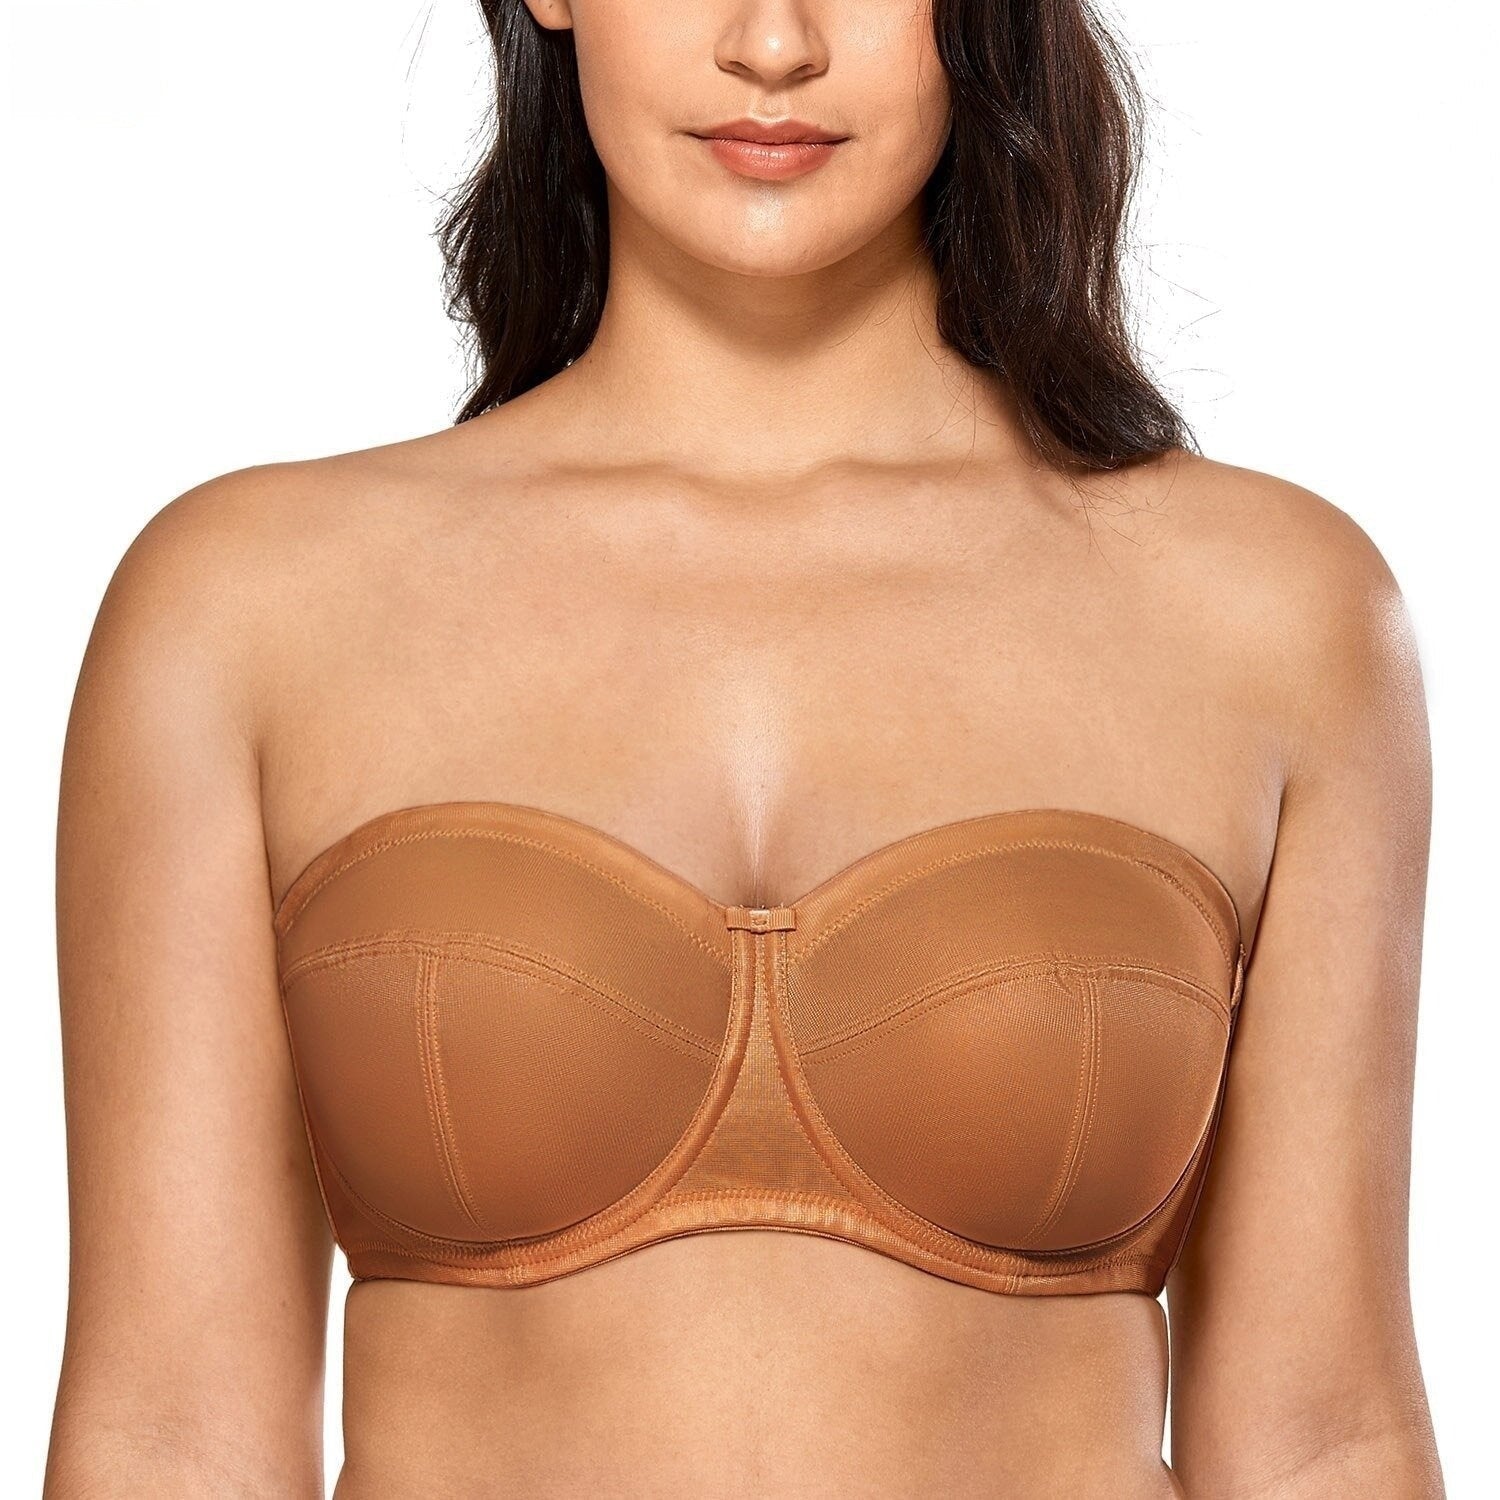 Buy Alishan Pink and Beige Lace Minimizer Non Padded Bra Bra - 36C